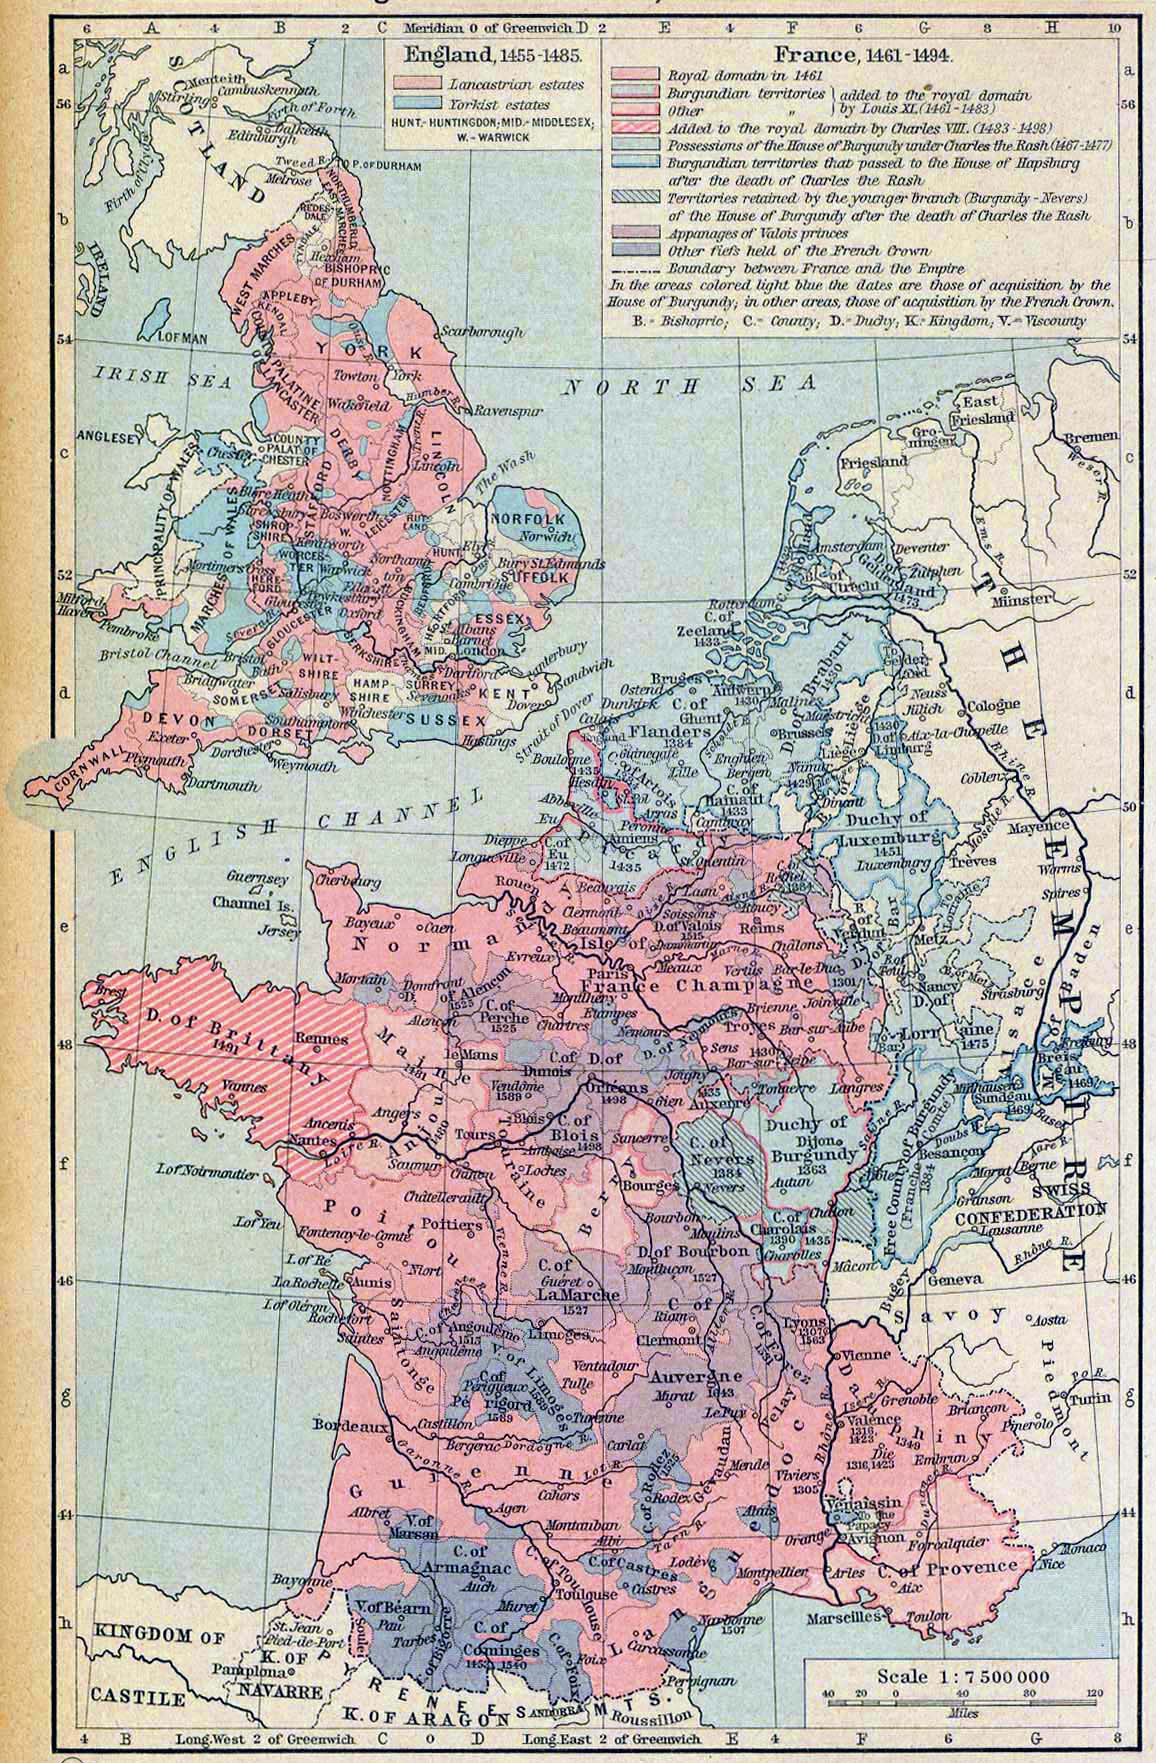 Map of England and France 1455-1494